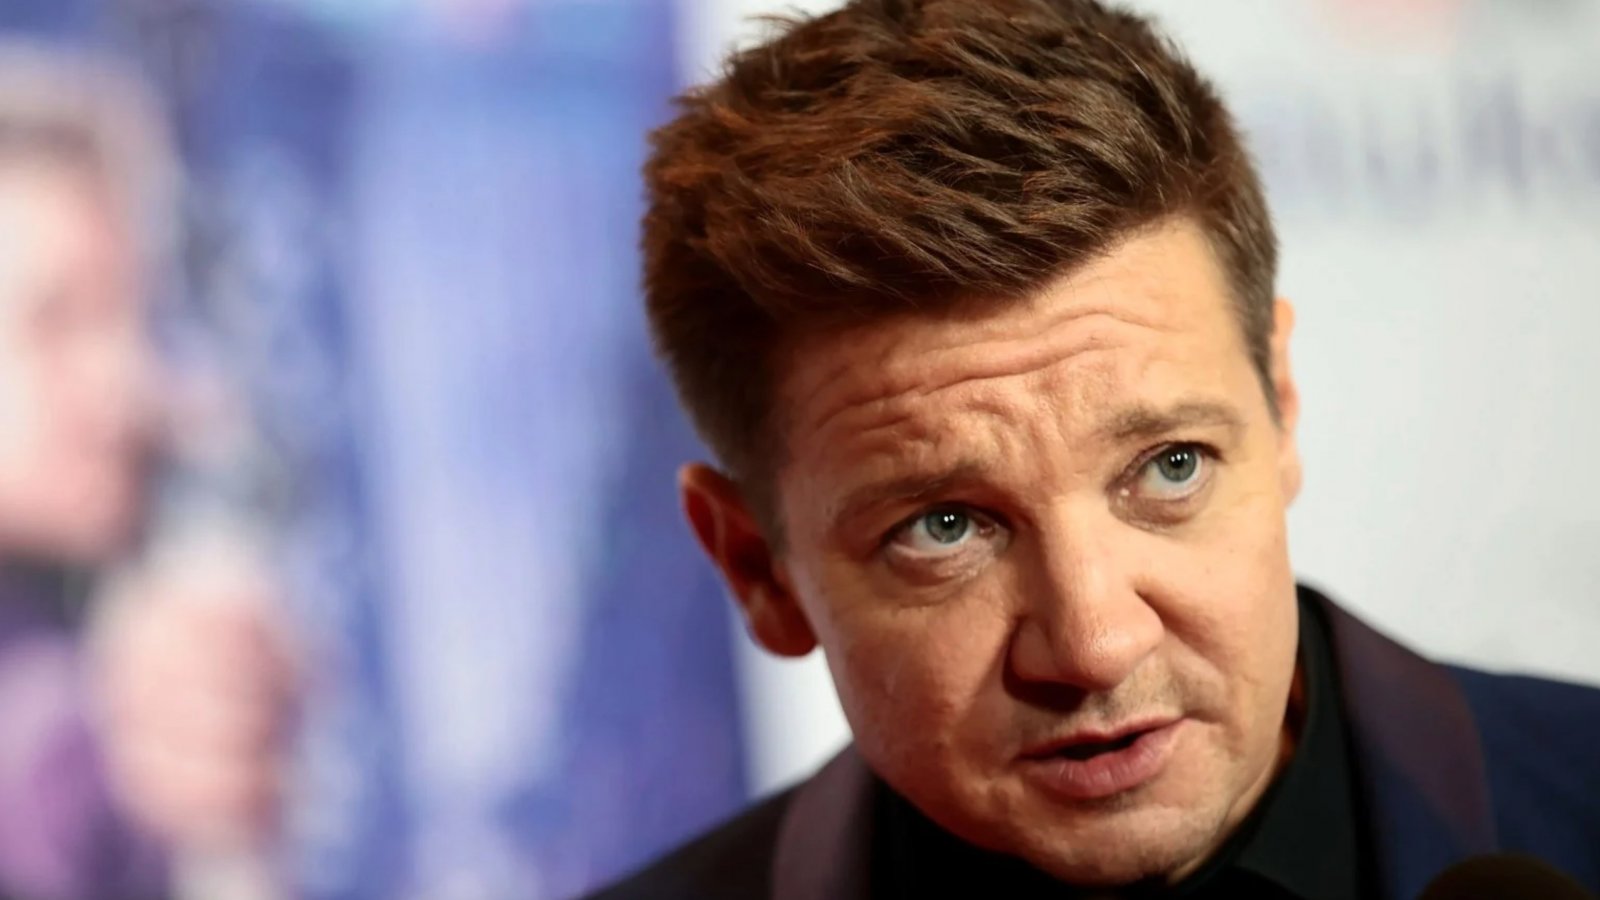 Jeremy Renner walks again after crash: "Now my body needs to rest and recover" (VIDEO)